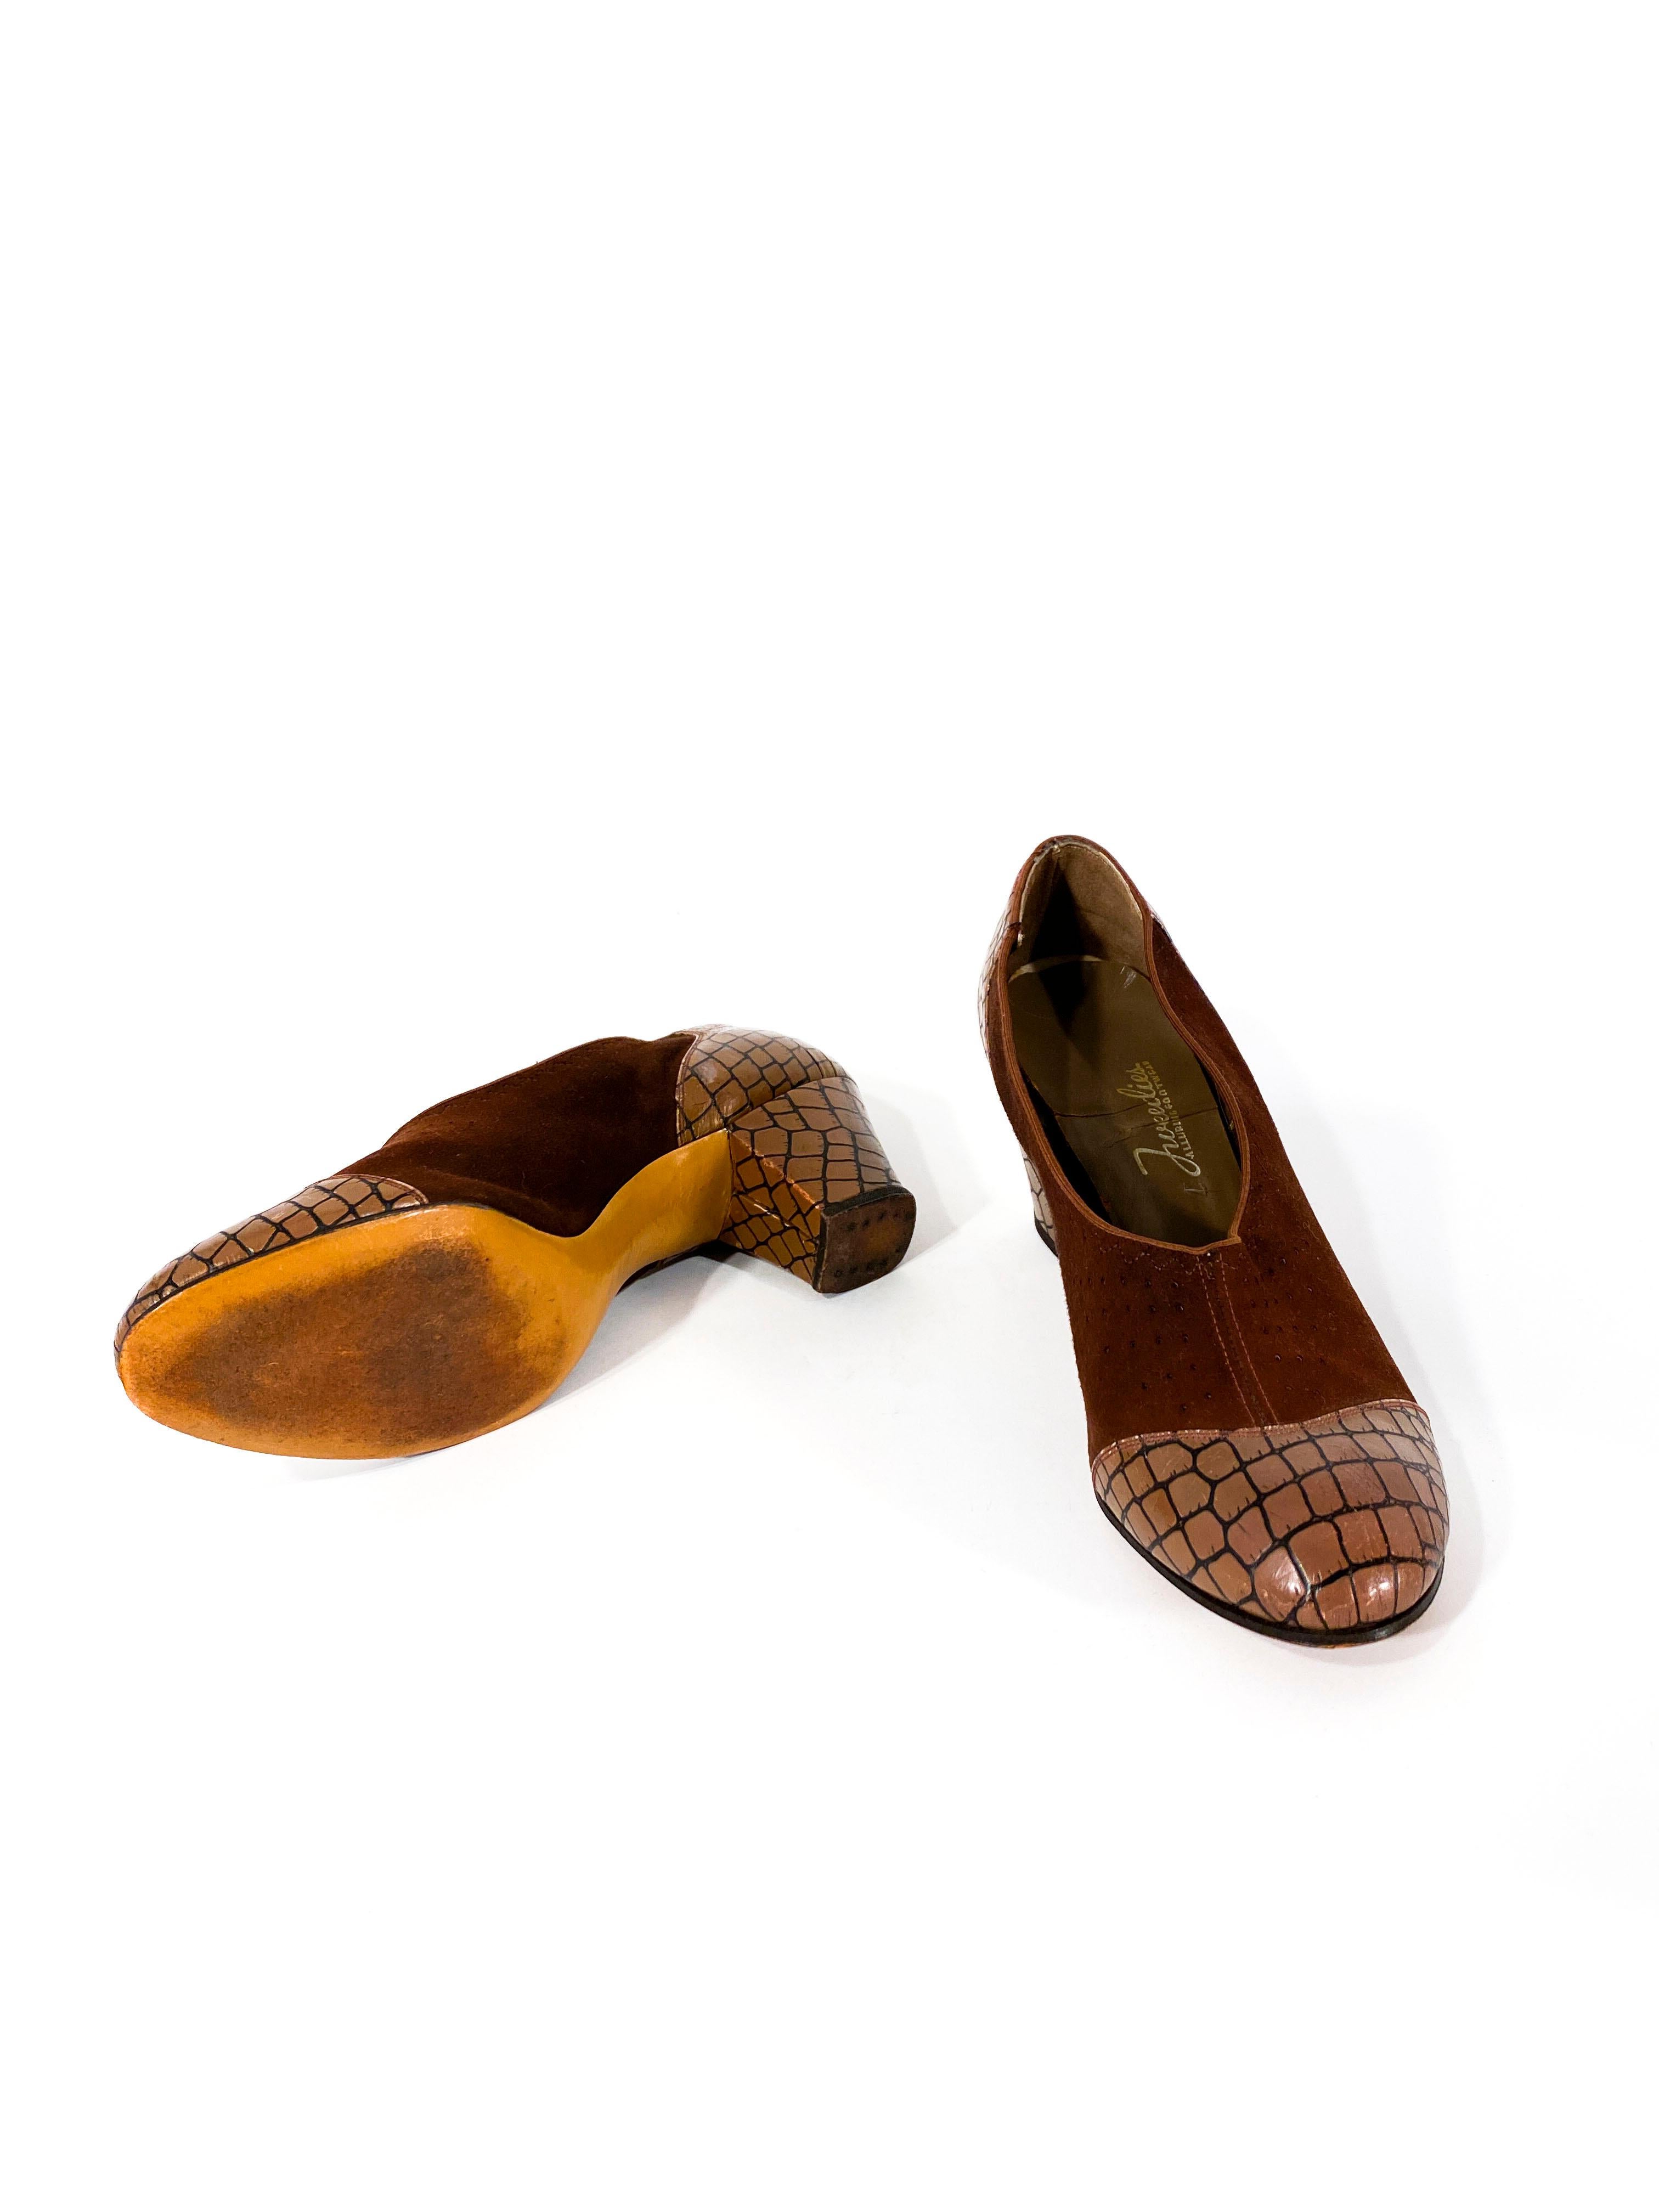 1930s Brown Suede and Alligator Pattern Heel In Good Condition For Sale In San Francisco, CA